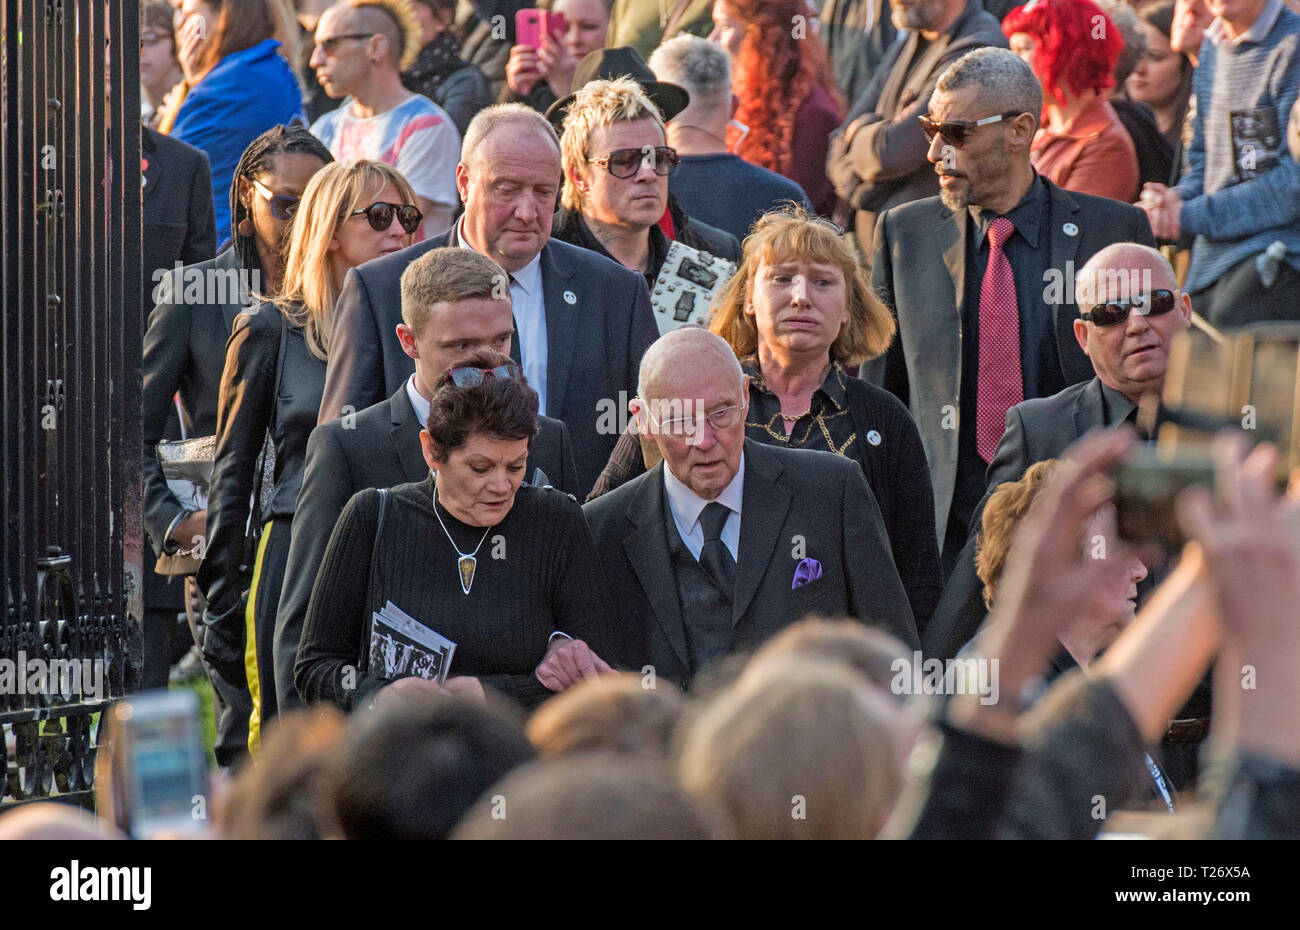 Essex, UK. 30th March 2019. The  funeral of Prodigy singer Keith Flint at St Marys Church in Bocking,  Essex today. Mourners leave the service and band members Liam Howlett, Maxim (Keith Palmer) and Leeroy Thornhill can be seen following Keith’s father Clive Flint out of the front gates of the church. Credit: Phil Rees/Alamy Live News Stock Photo